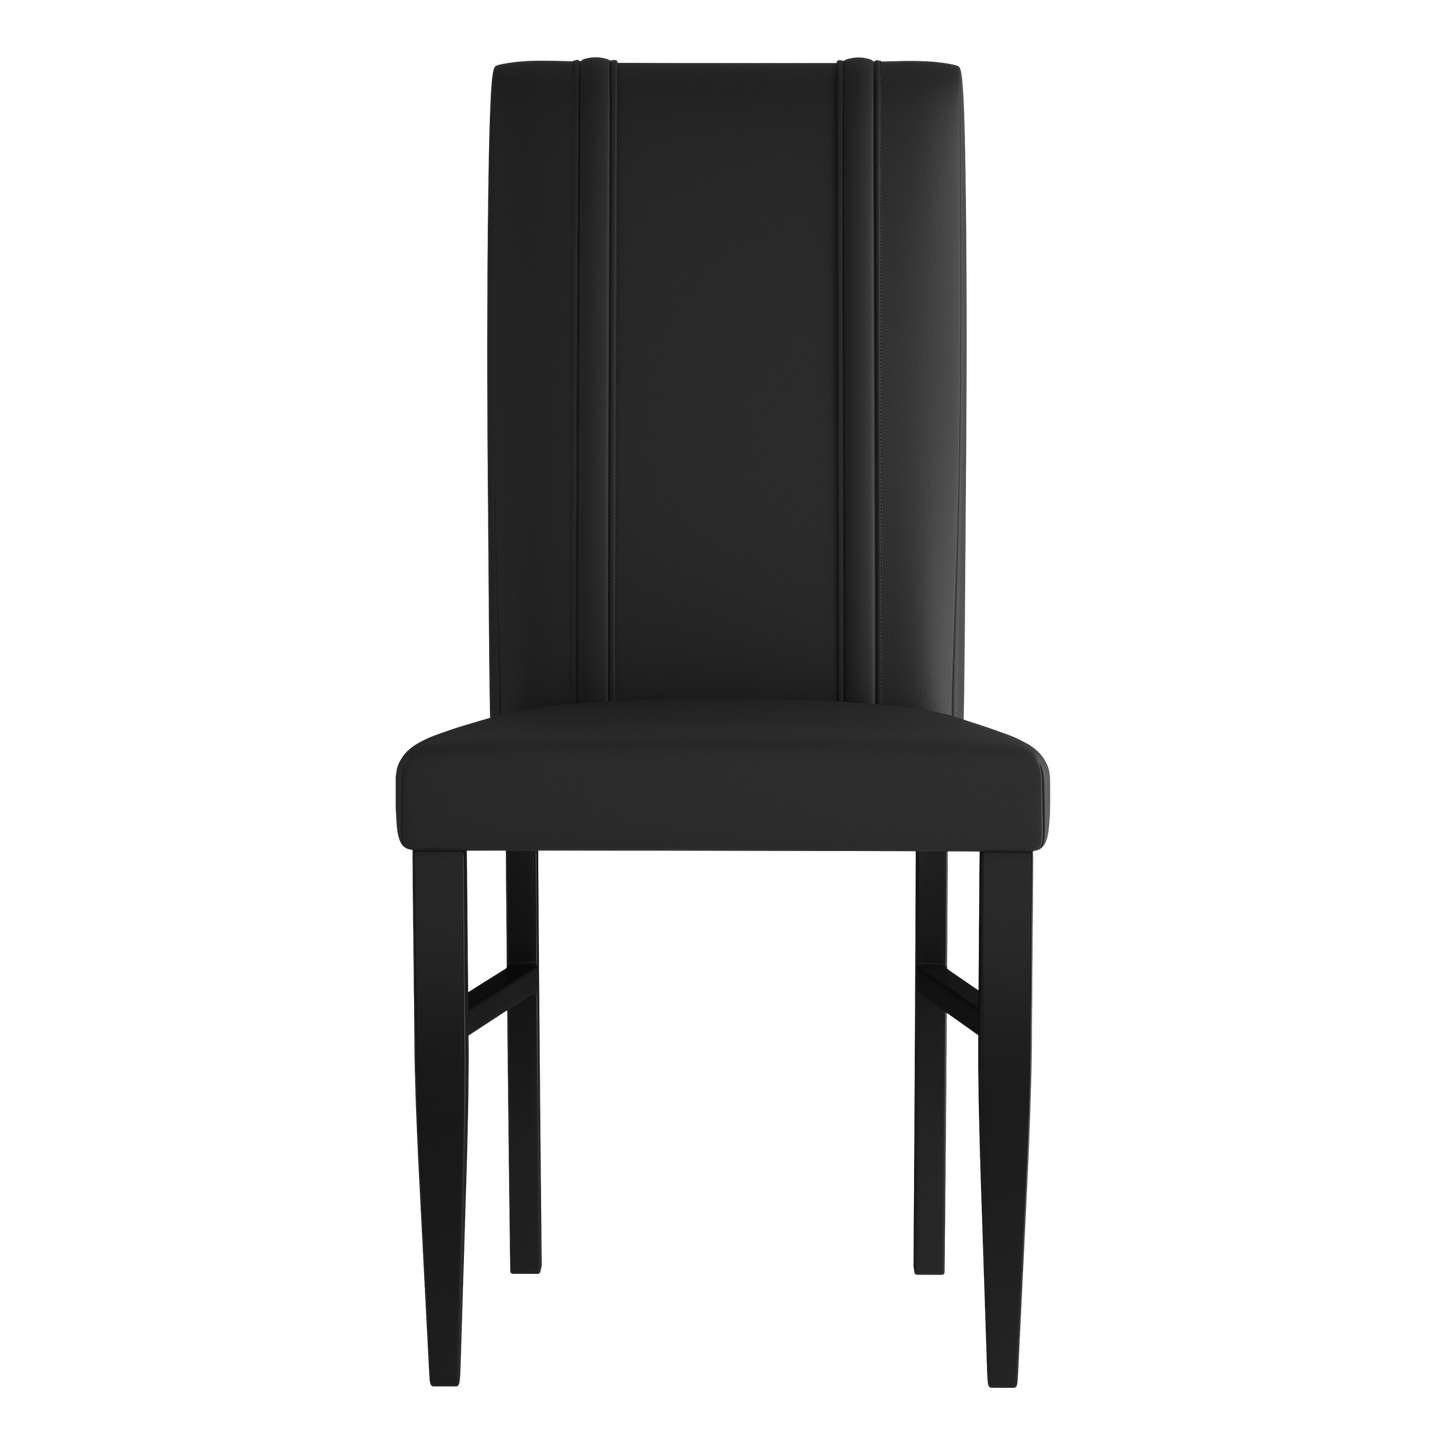 Side Chair 2000 with Los Angeles Kings Primary Logo Set of 2